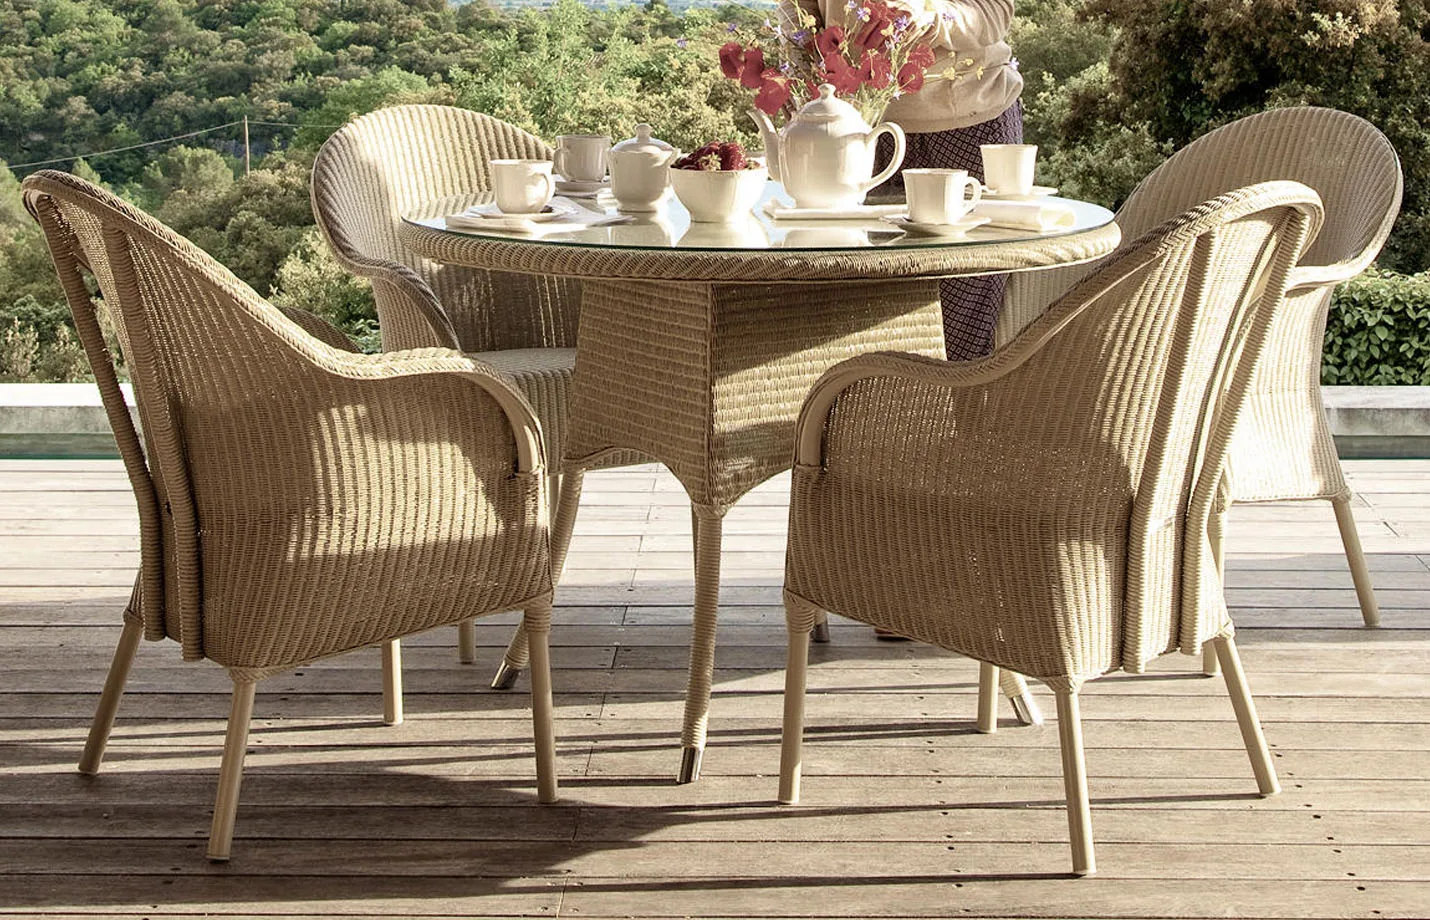 Nice dining chair outdoor LS01